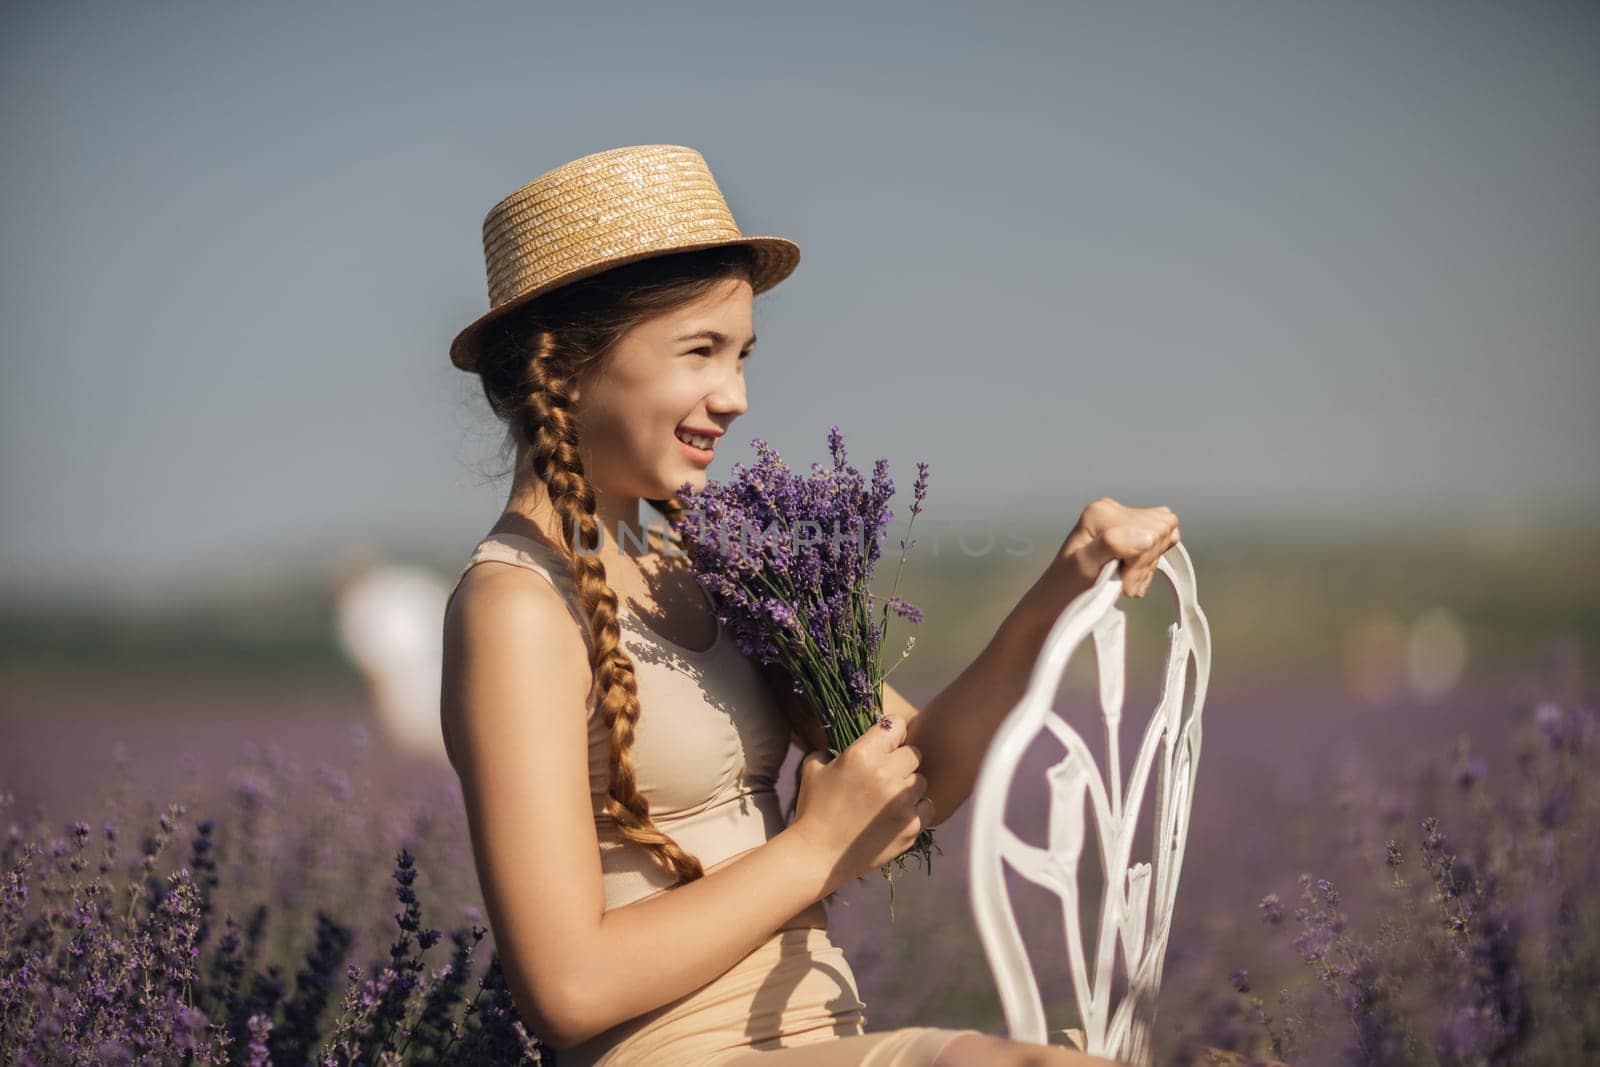 girl sitting field lavender and wearing a straw hat. She is smiling and holding a bouquet of flowers.